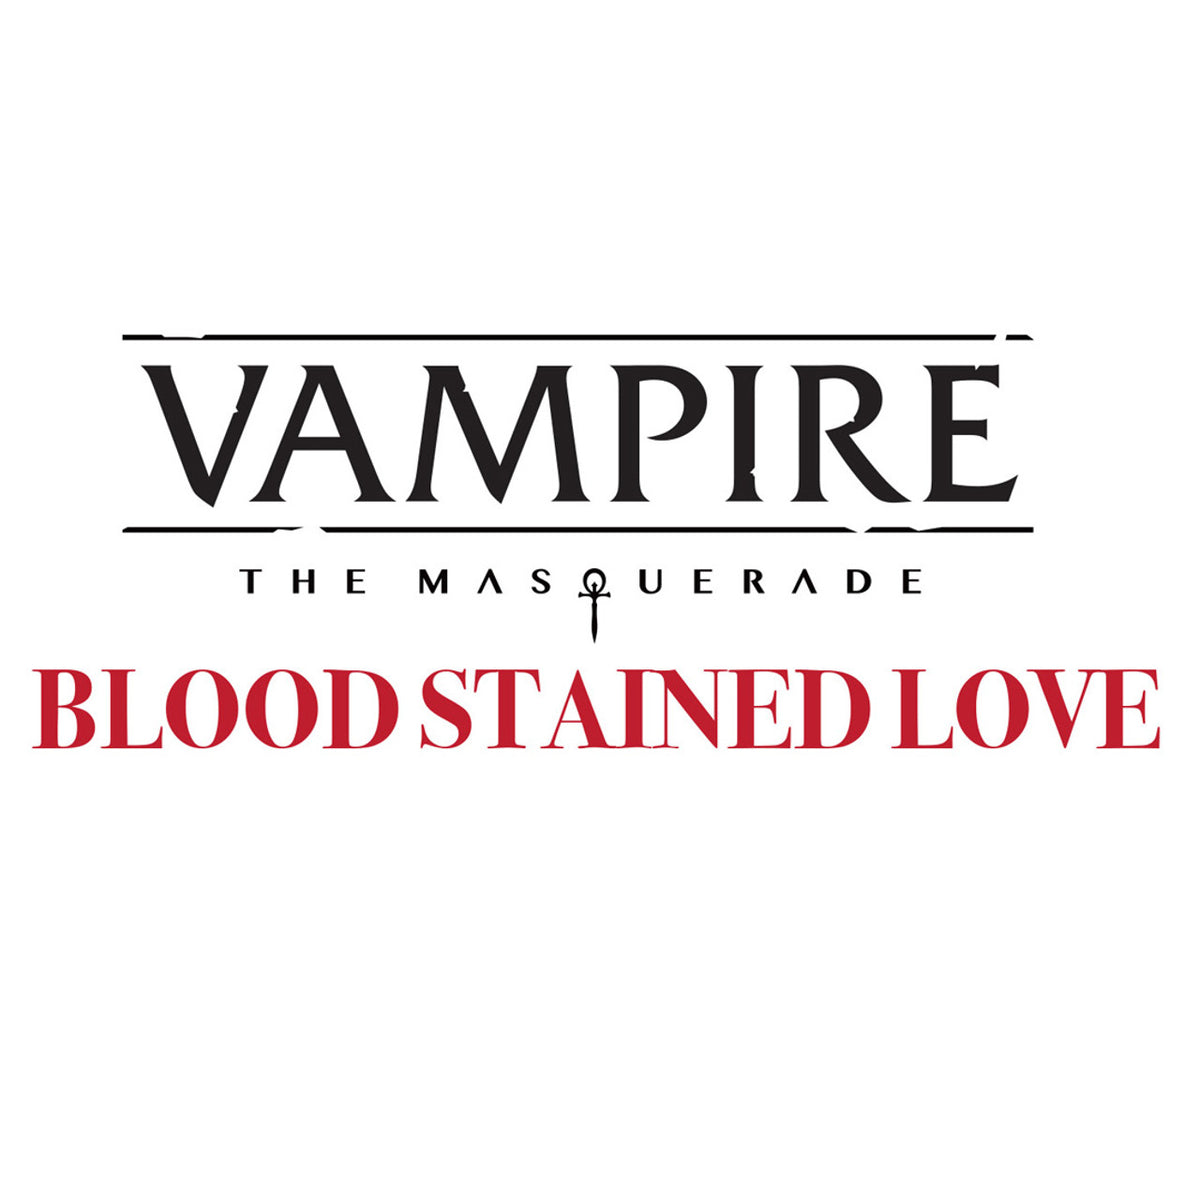 Vampire: The Masquerade 5th Edition RPG - Blood-Stained Love Sourcebook